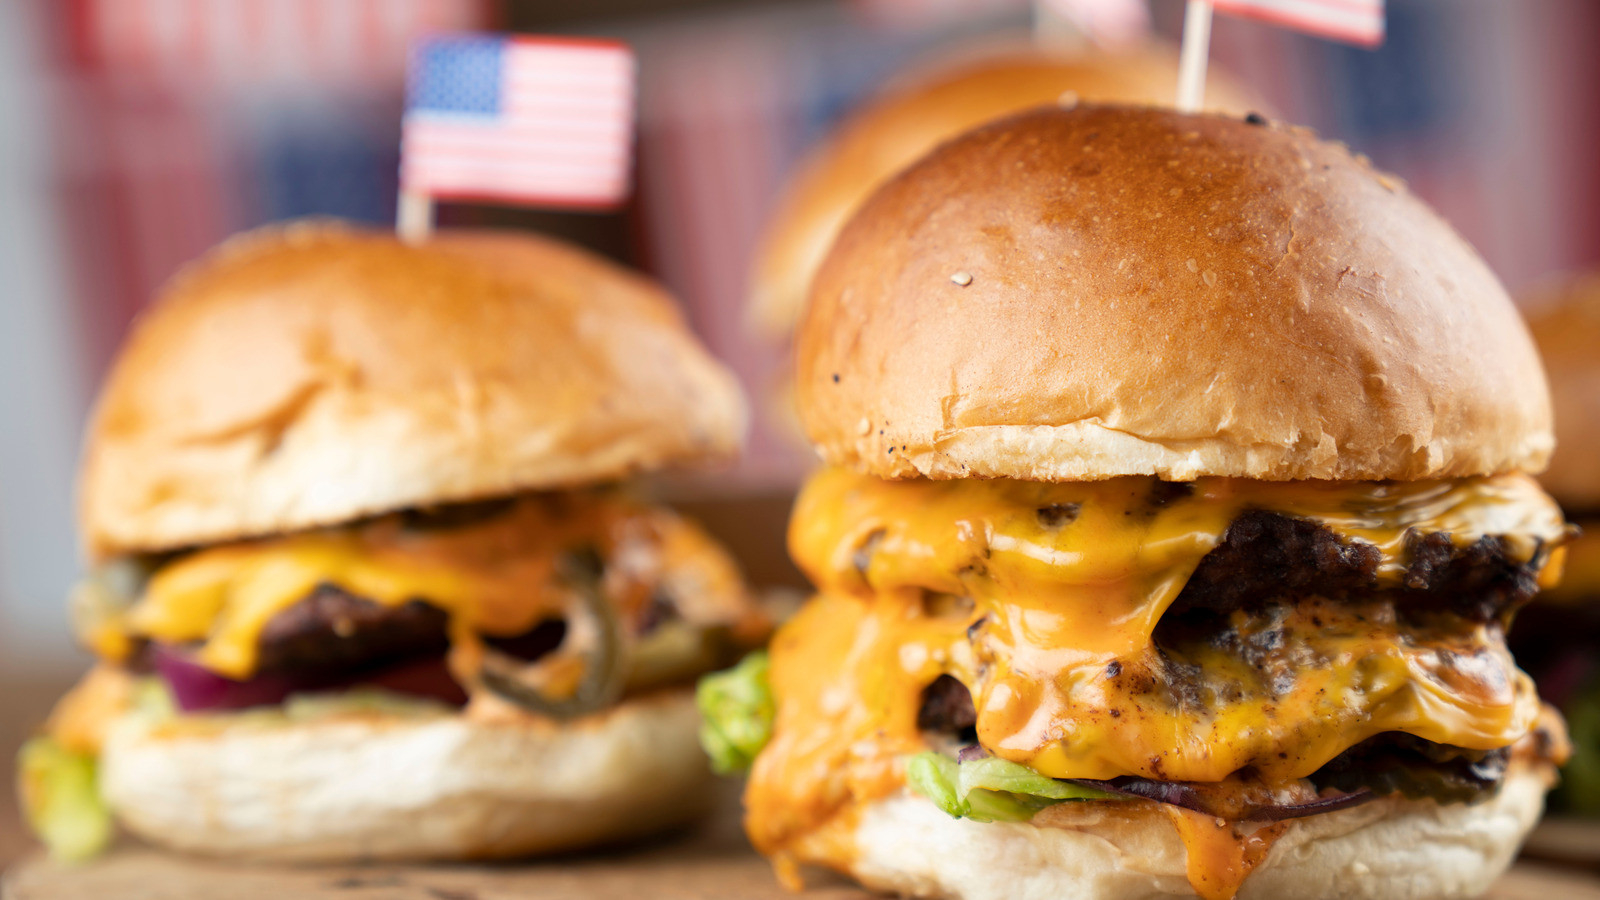 National Burger Day 2021: Where To Get The Best Food-National Food Holidays For 2021